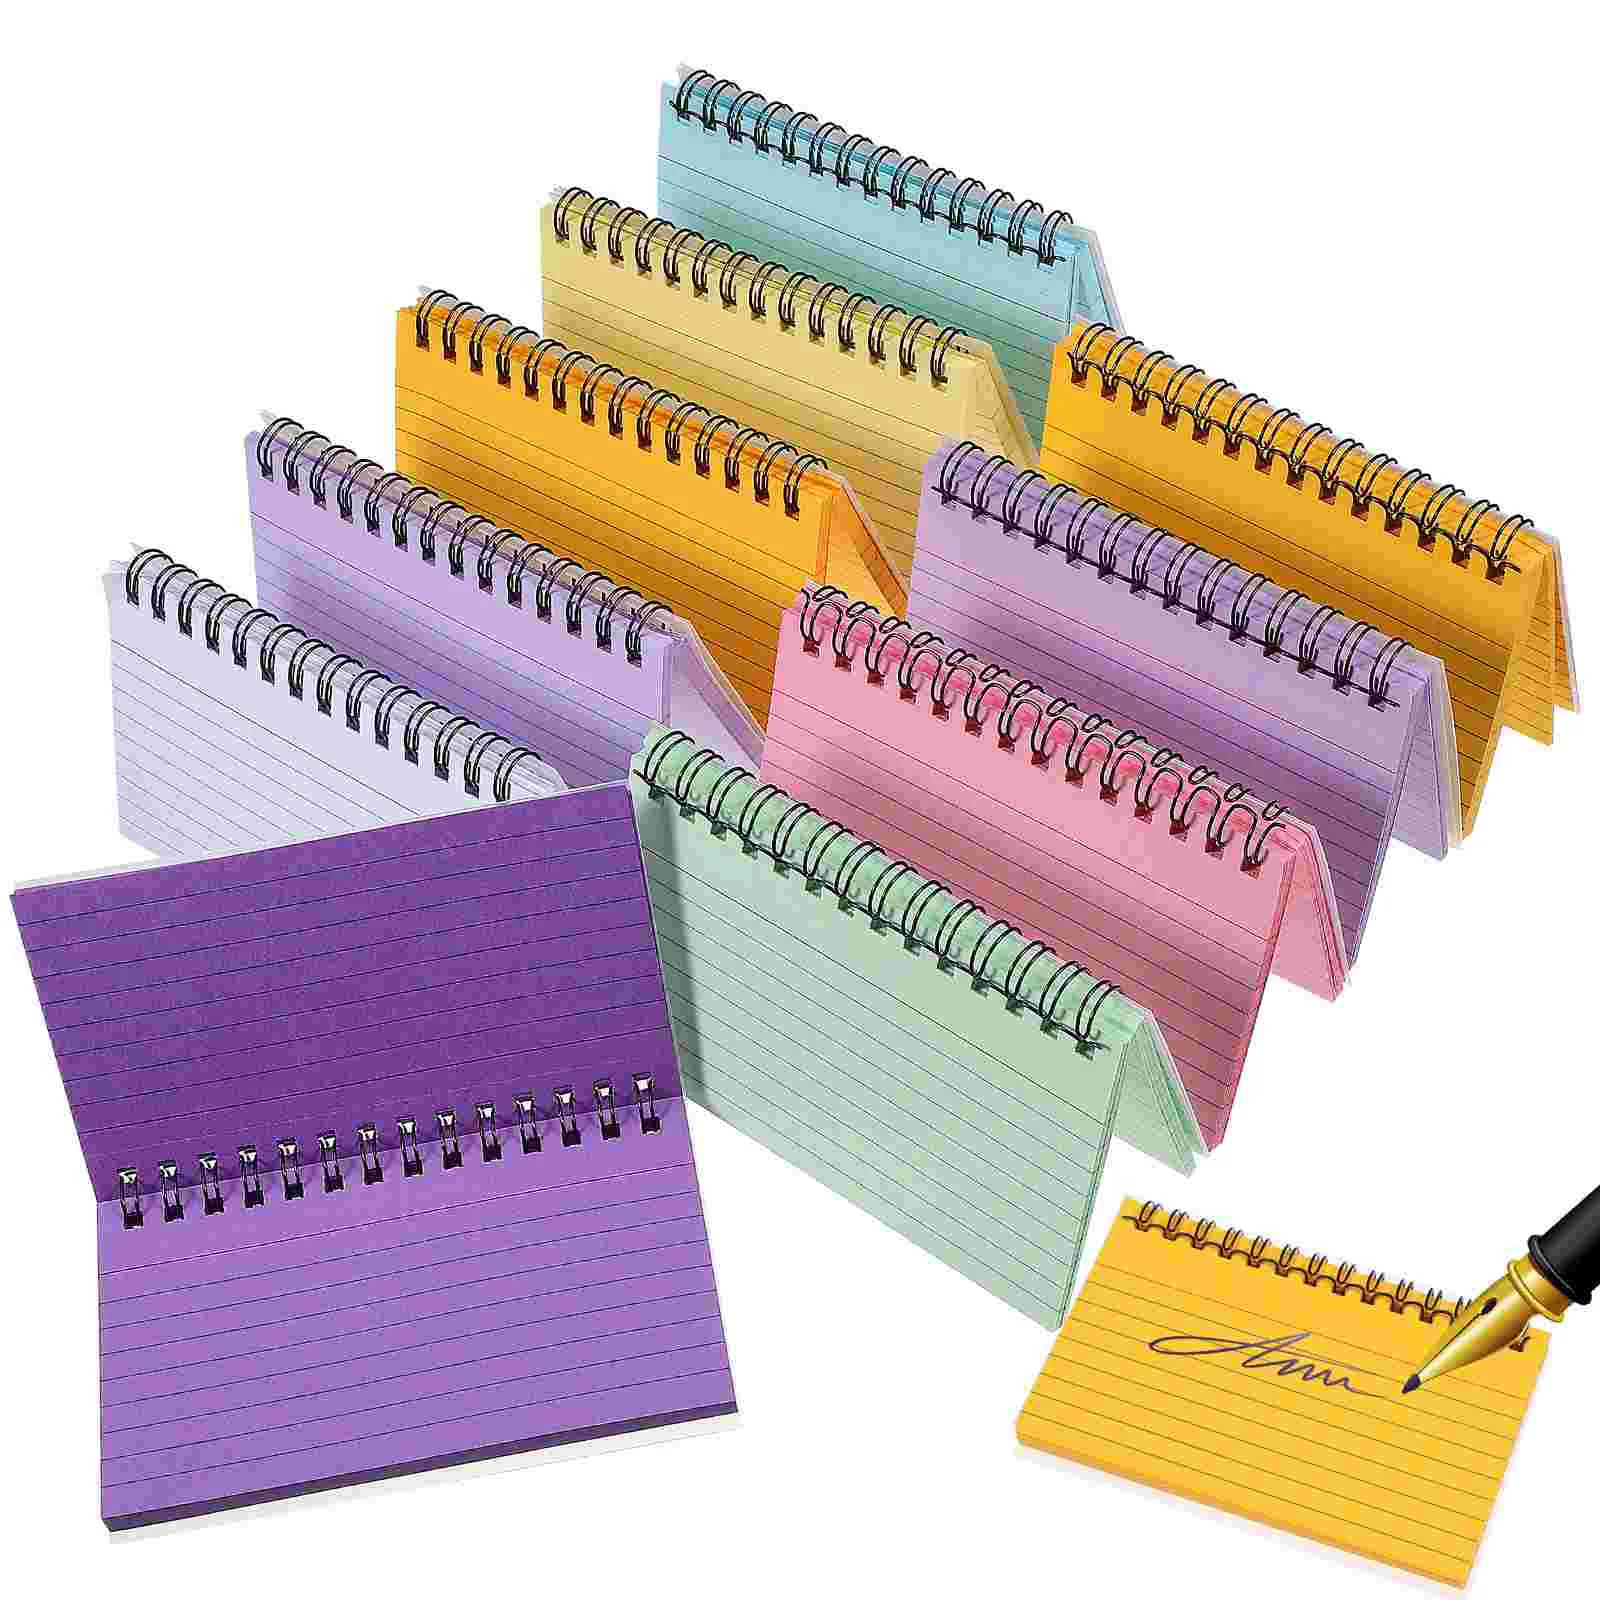 

Notebook Spiral Cards Pocket Index Mini Notepad Memo Notepads Lined Wirebound Pad Top Journal Bound Ruled Record Notebooks Note